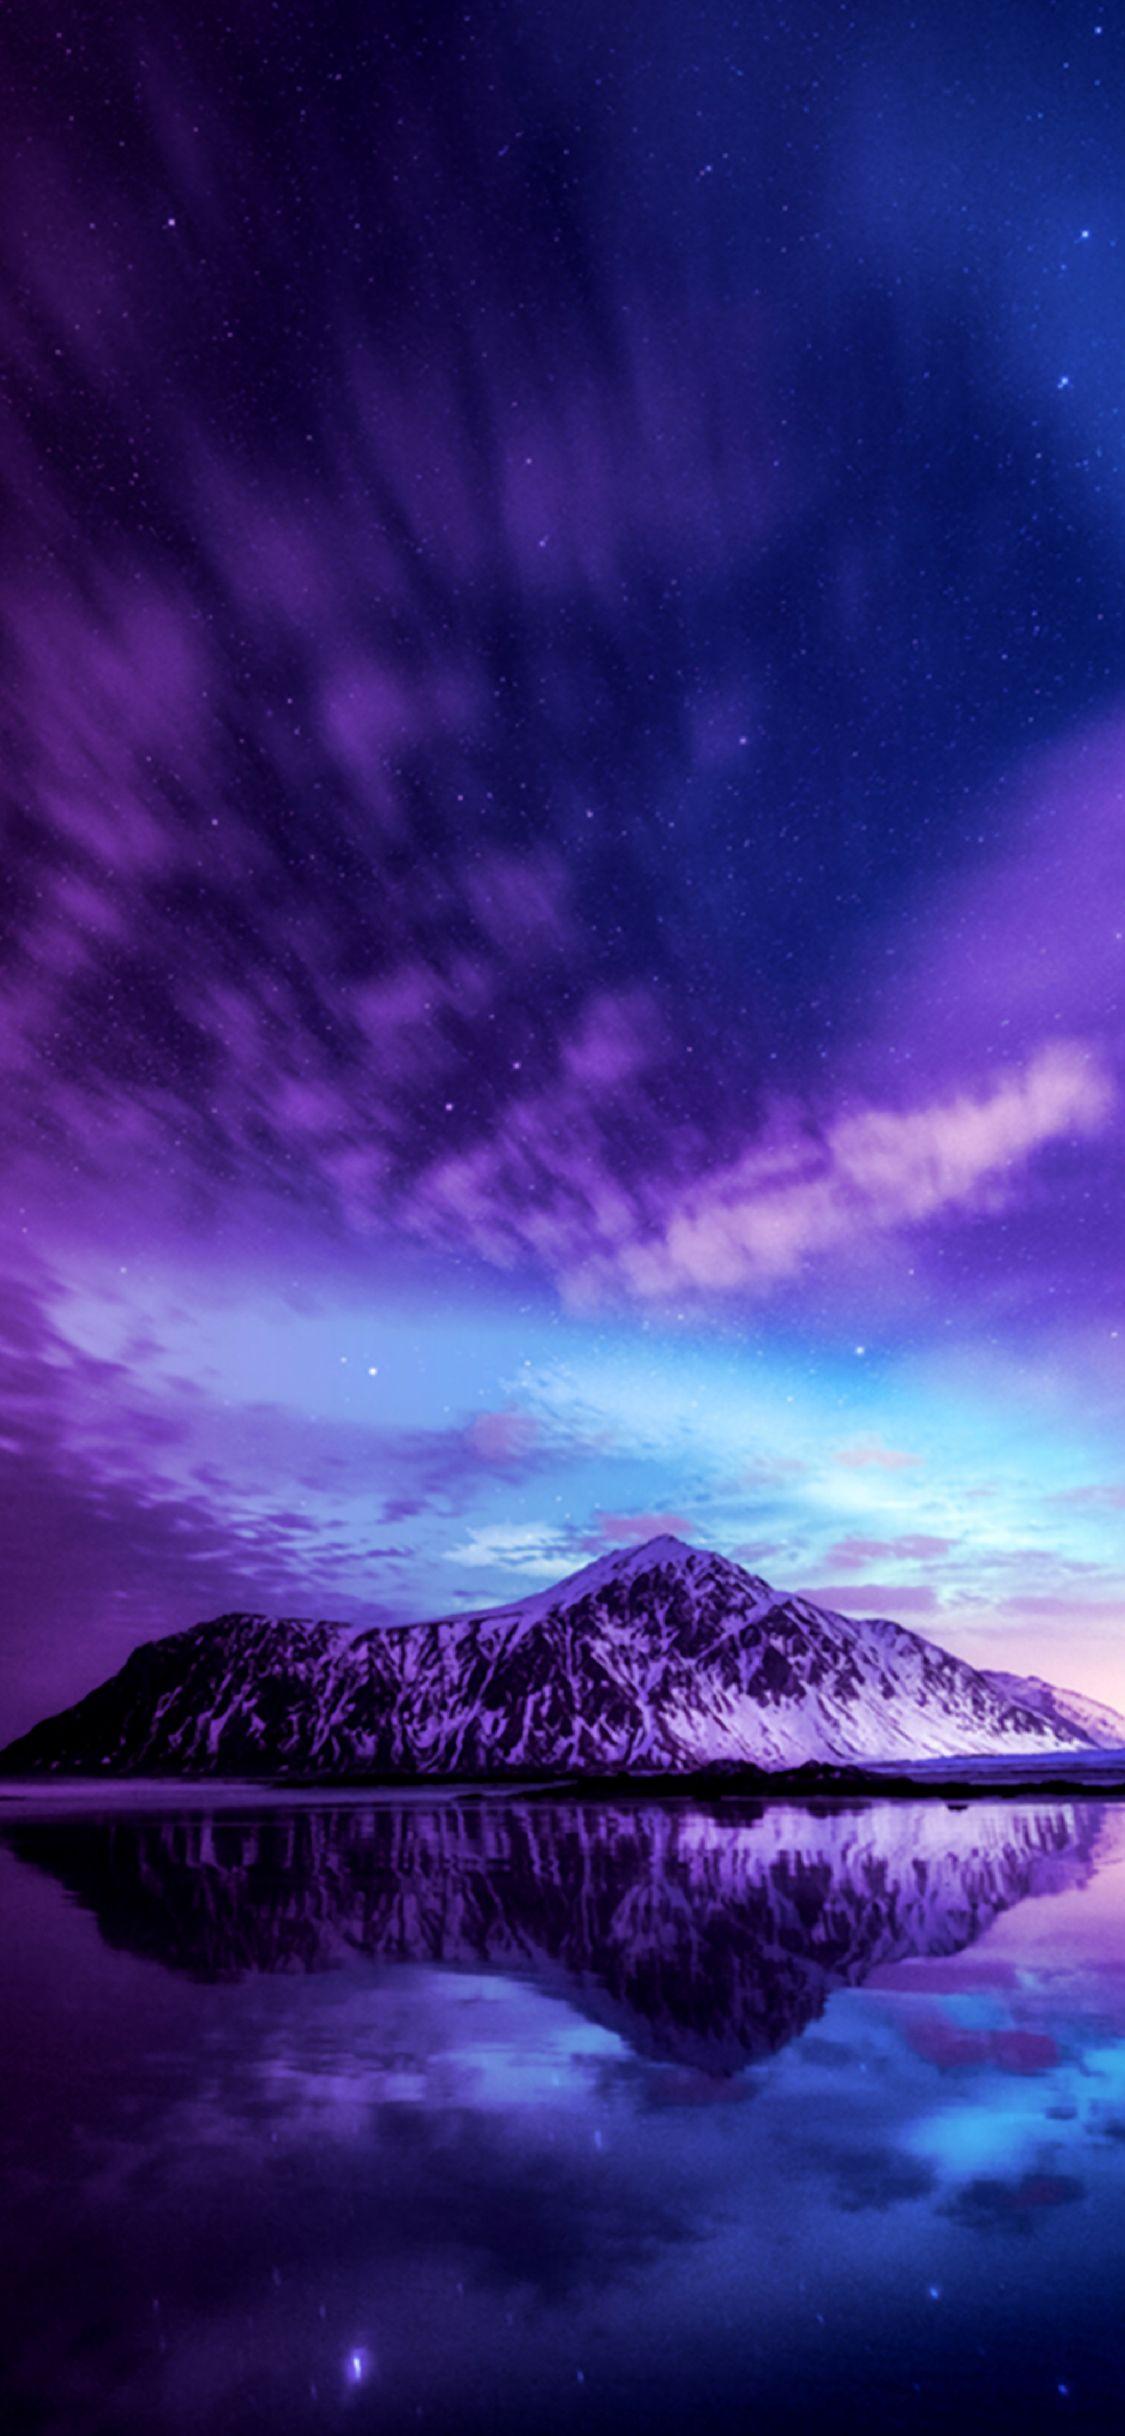 A mountain in a purple sky. Nature photo, Nature picture